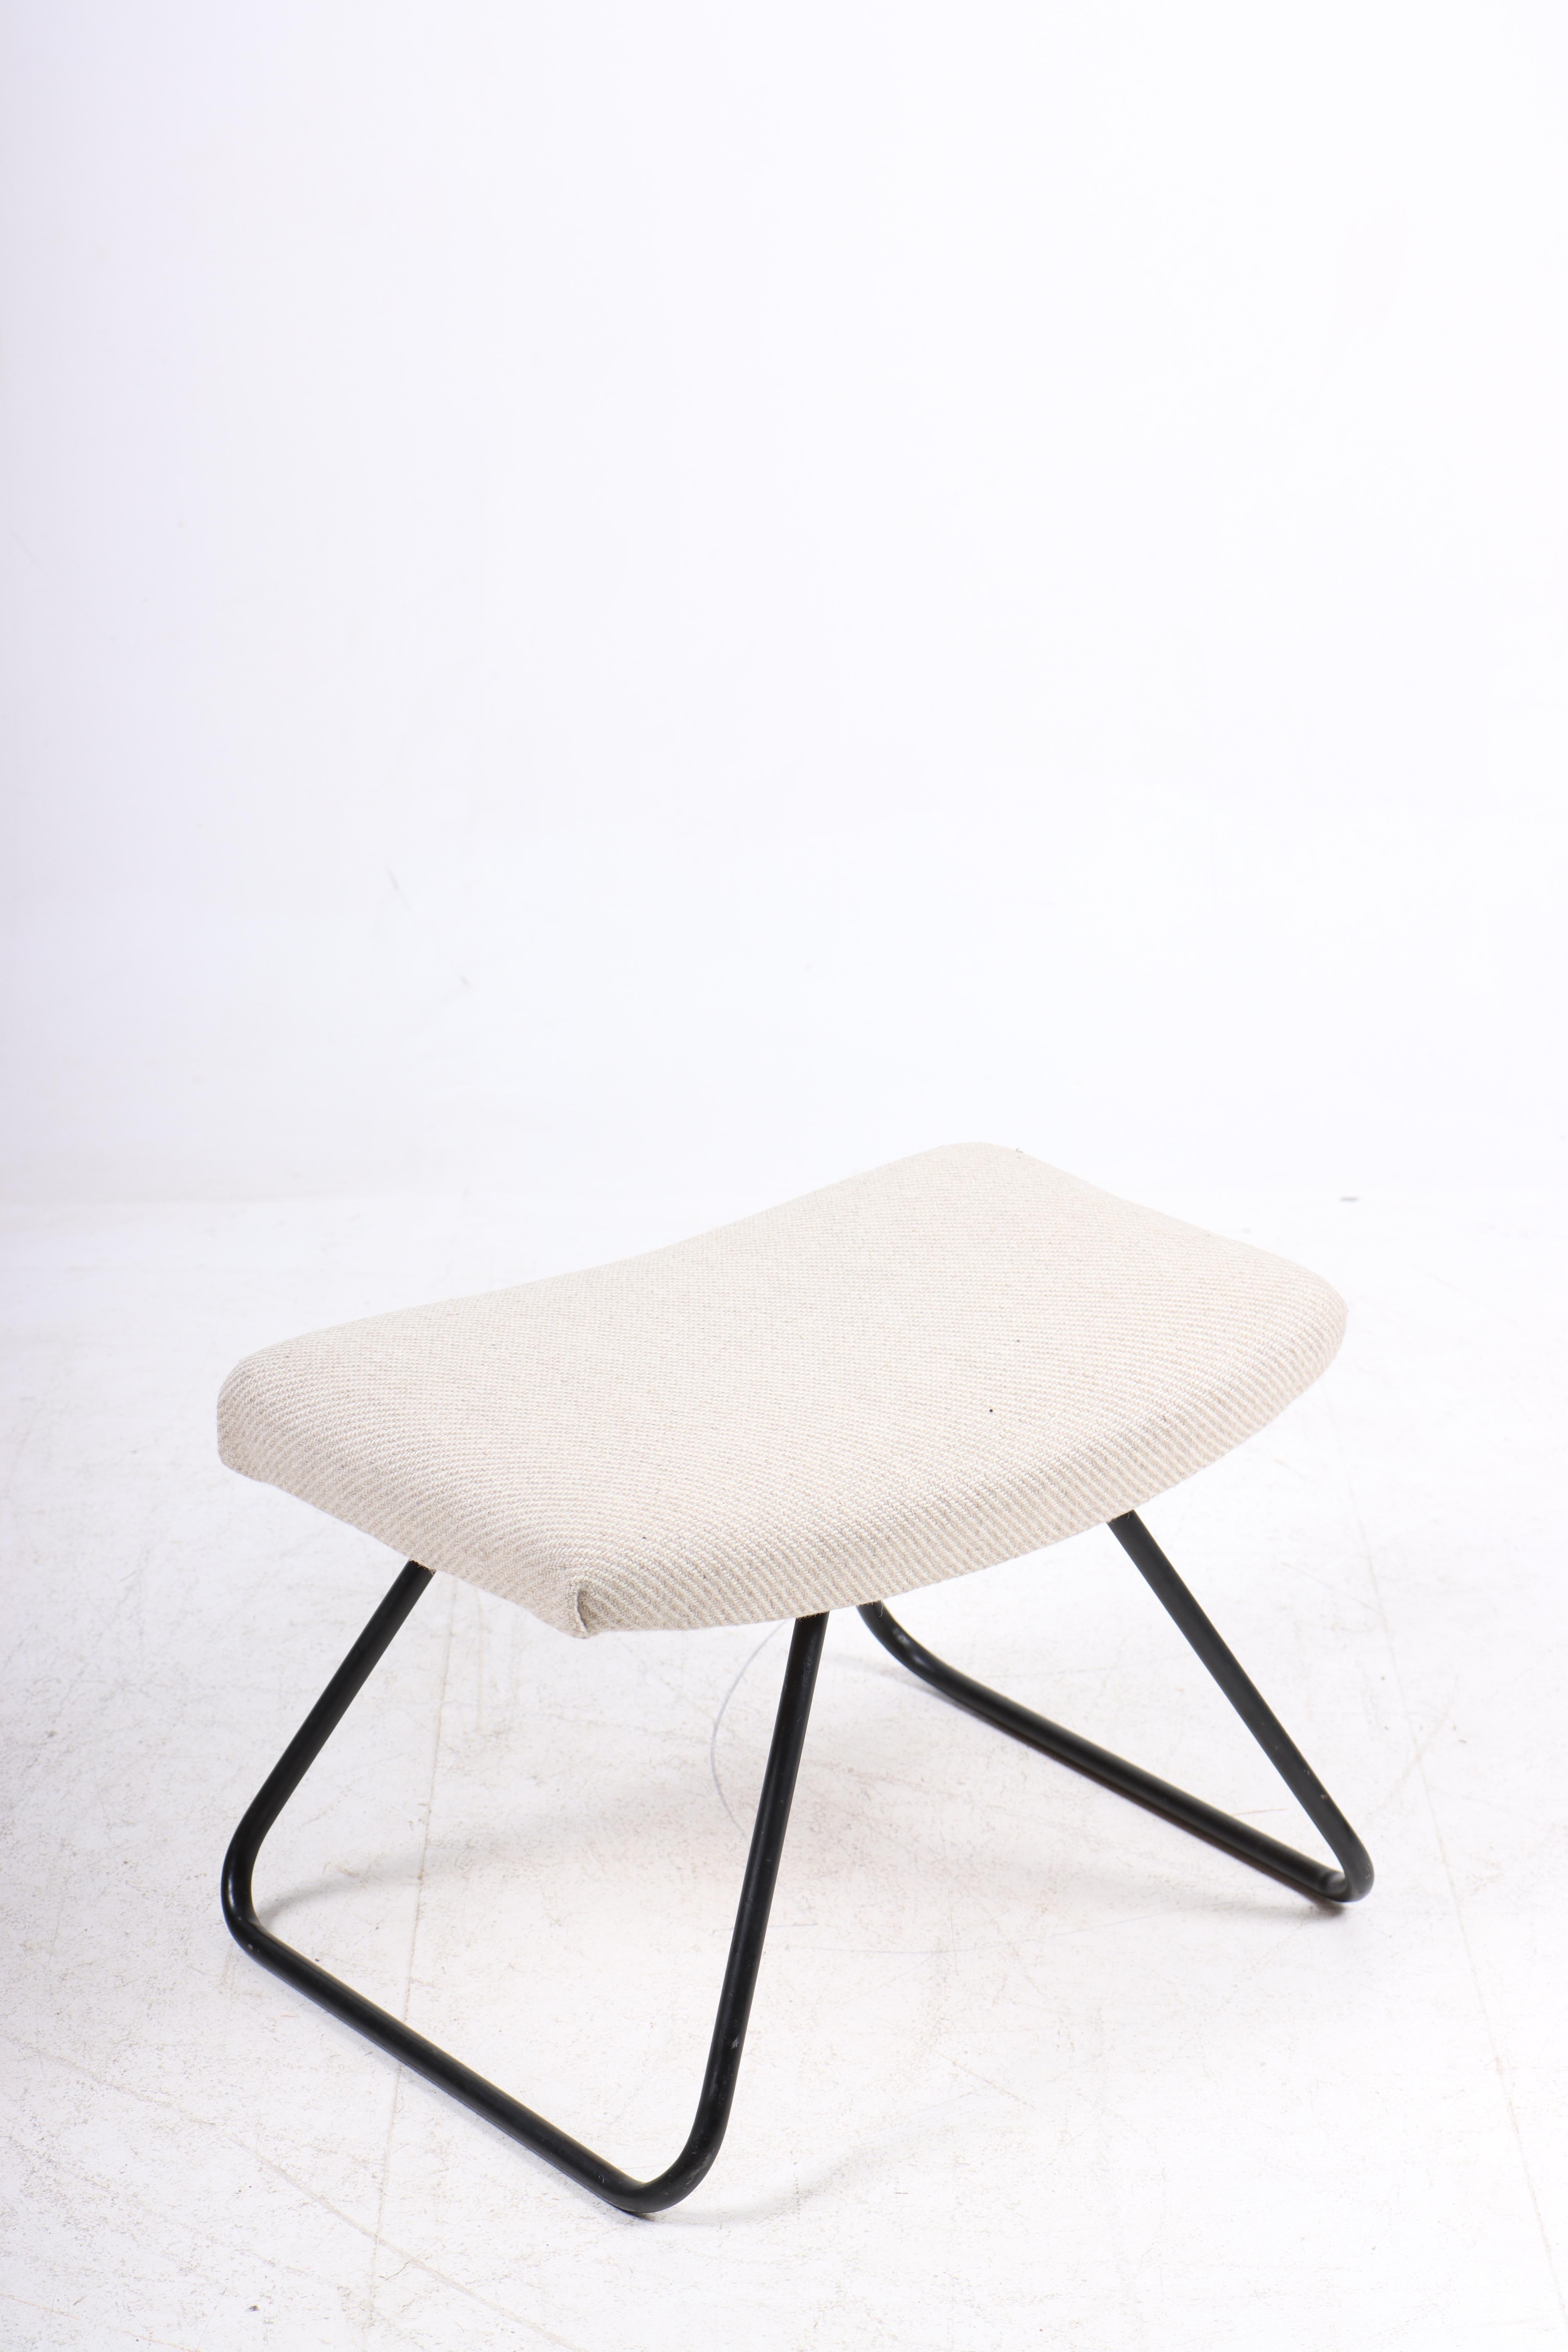 Scandinavian Modern Midcentury Stool with Fabric, Made in Denmark 1960s For Sale